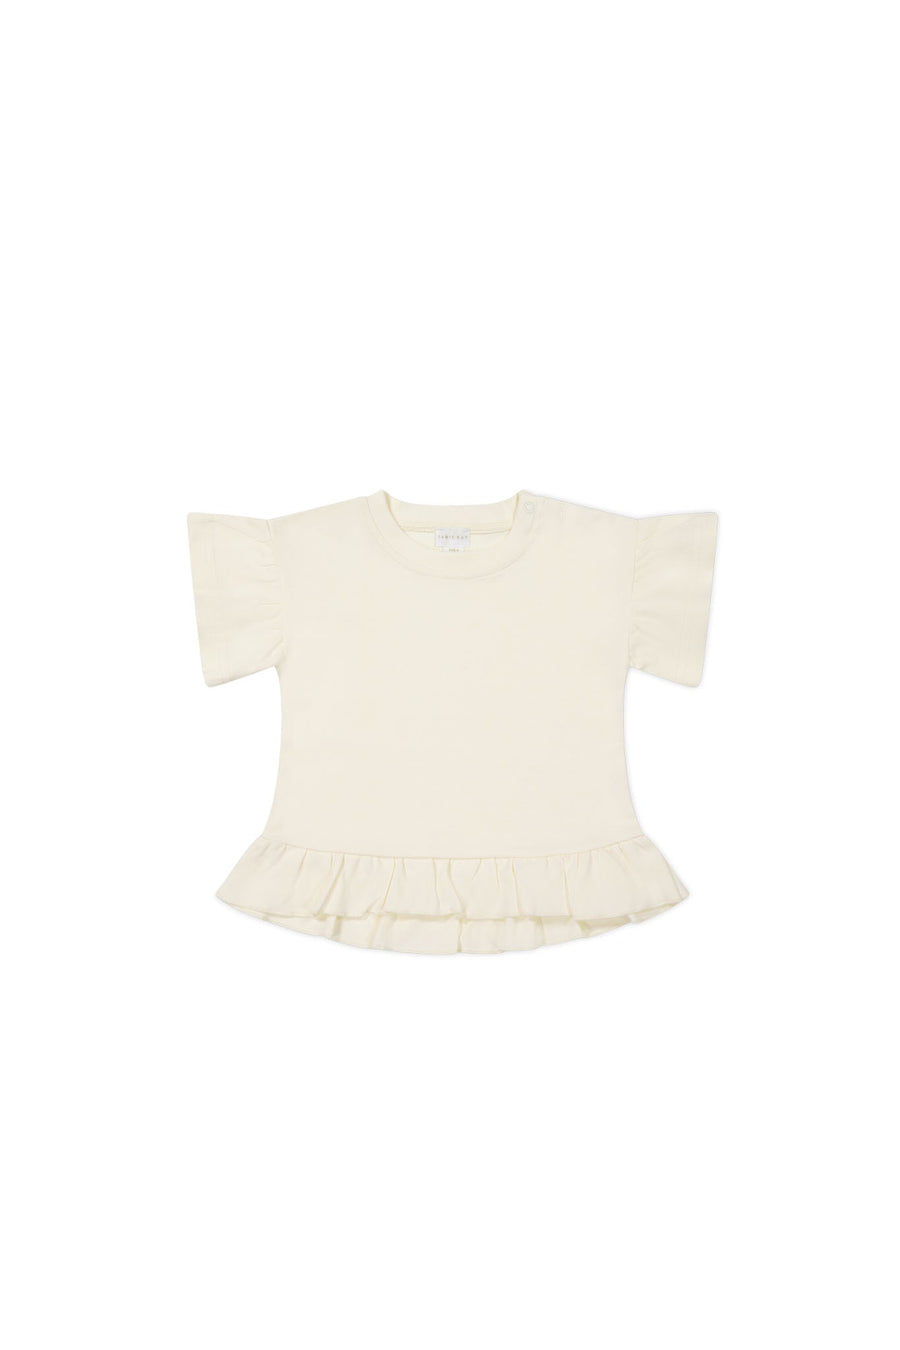 Pima Cotton Imogen Top - Parchment Childrens Top from Jamie Kay USA